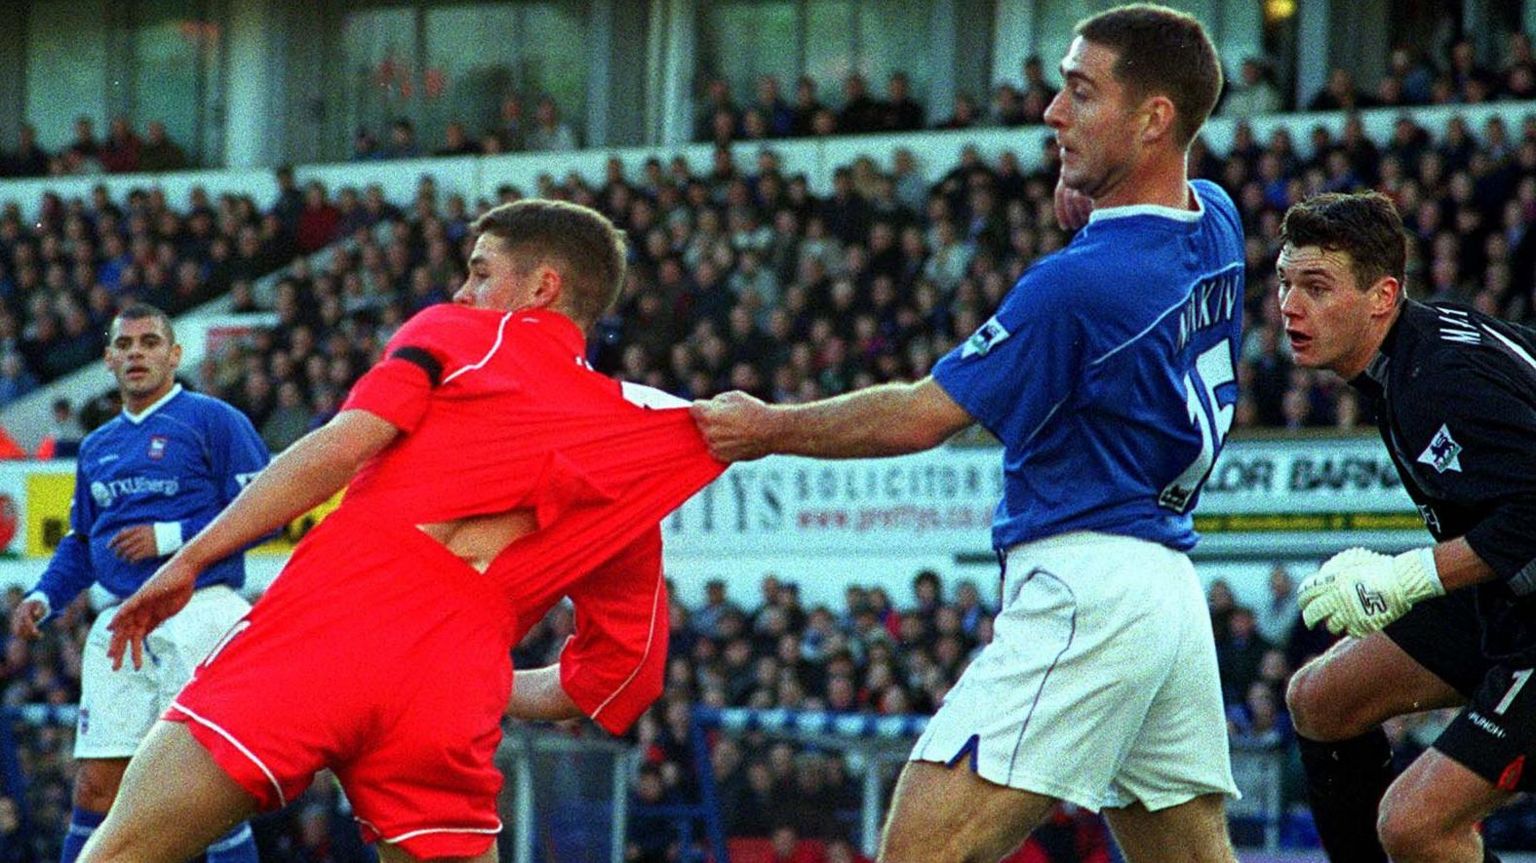 Ipswich's Chris Makin tussles with Michael Owen of Liverpool